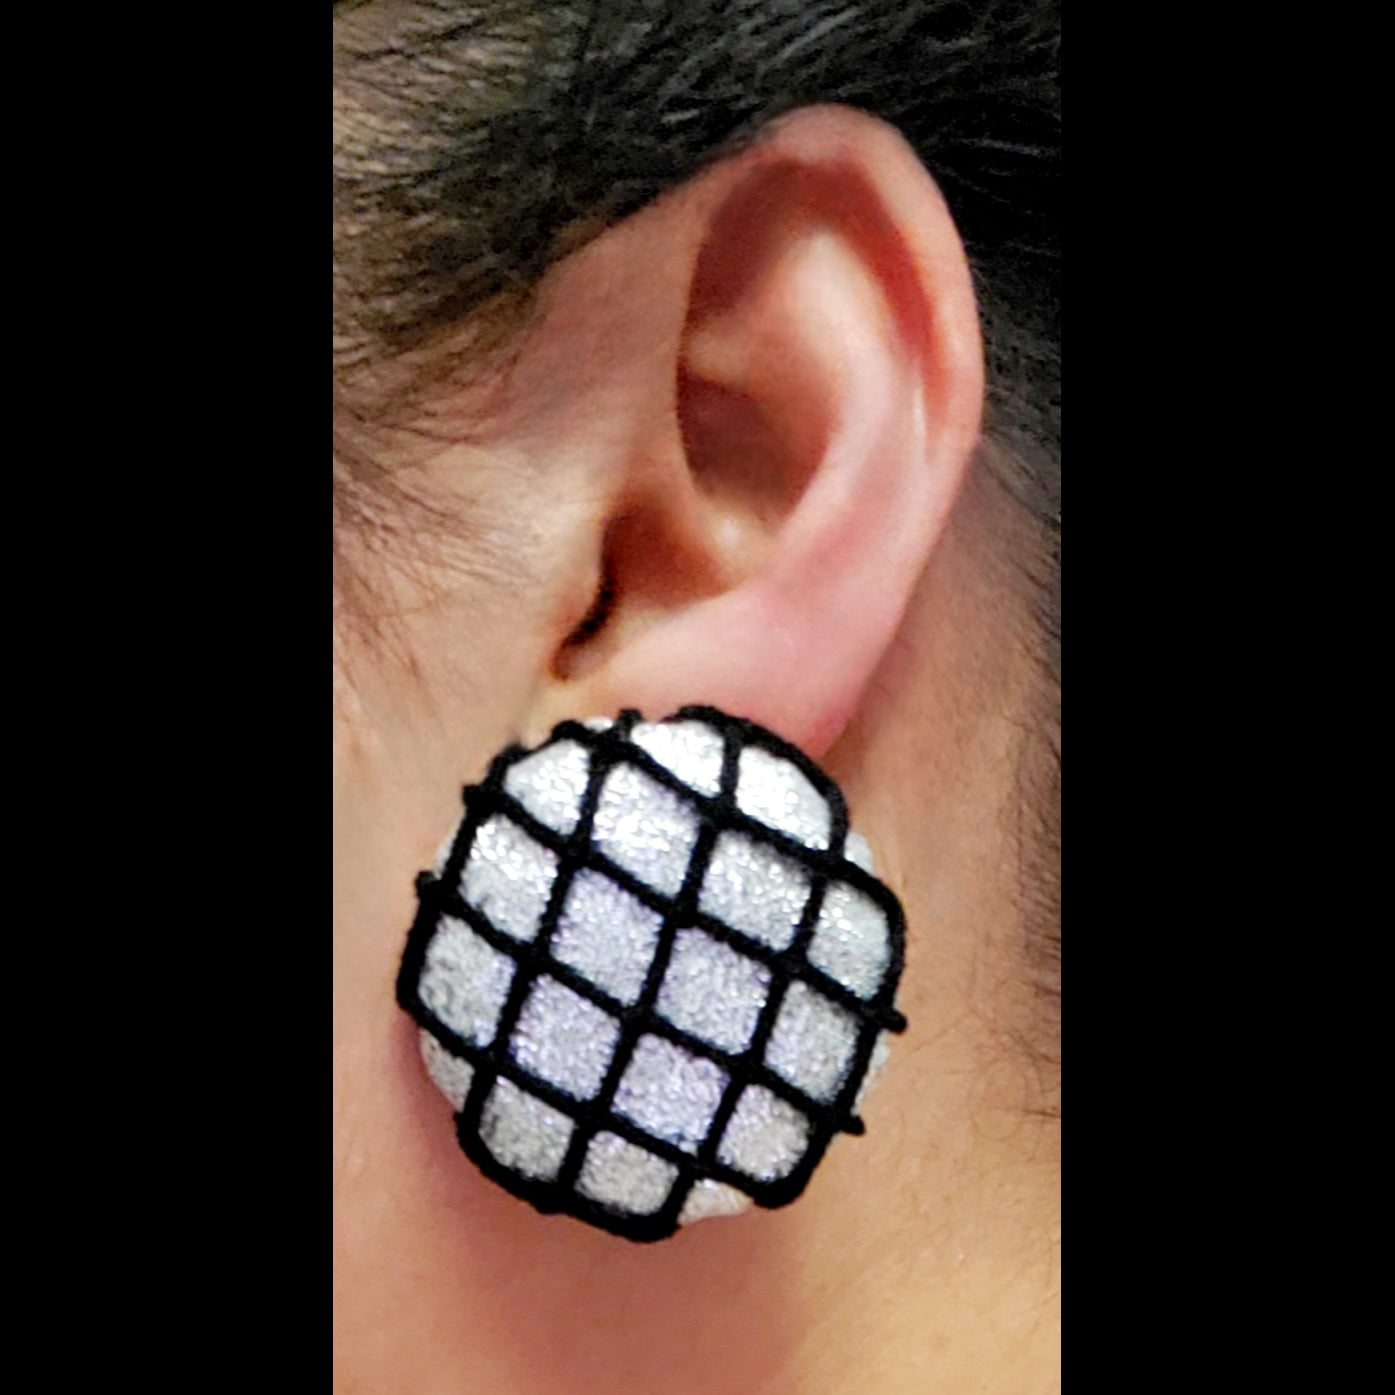 Silver and fishnet button earring worn on ear